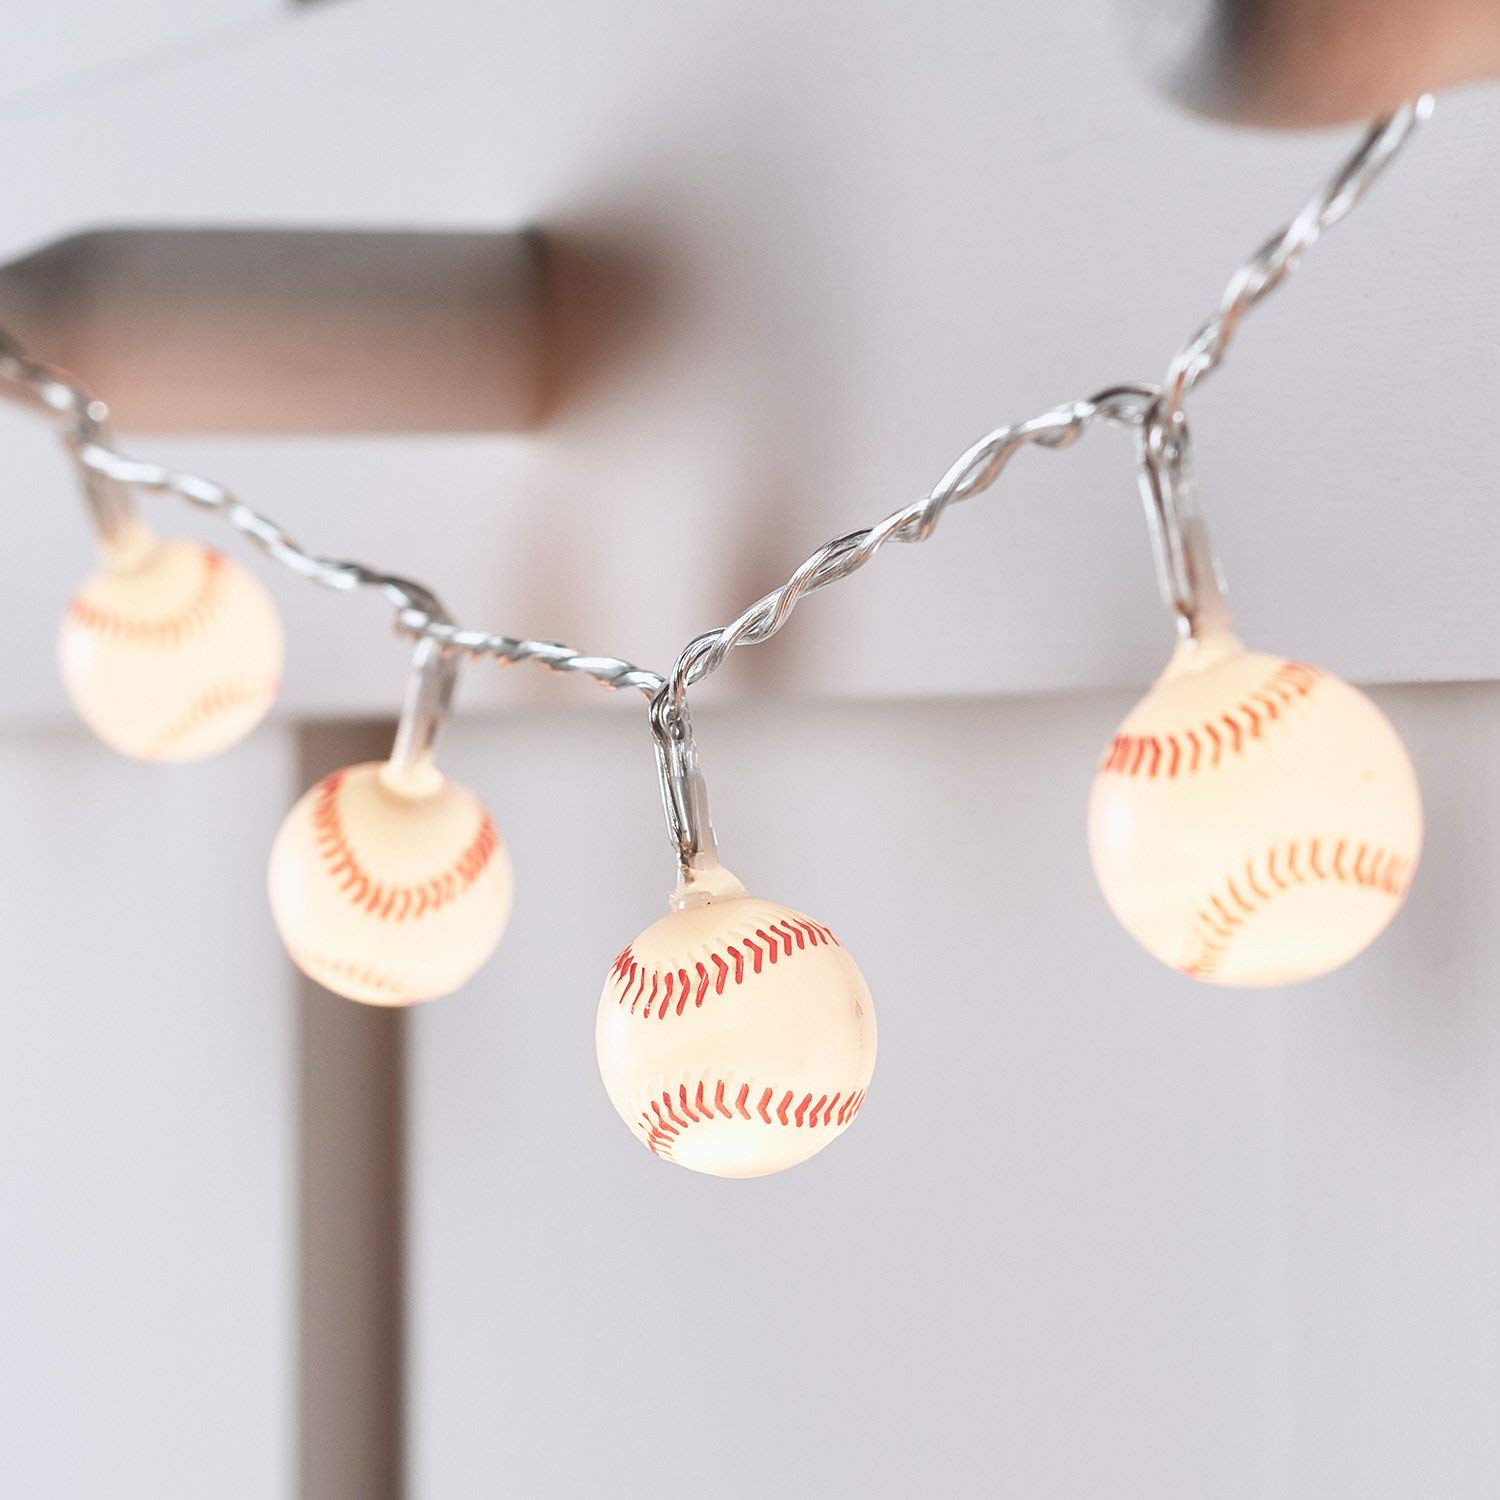 Book Cover Lights4fun, Inc. 20 Mini Baseball Battery Operated Indoor LED Fairy String Lights